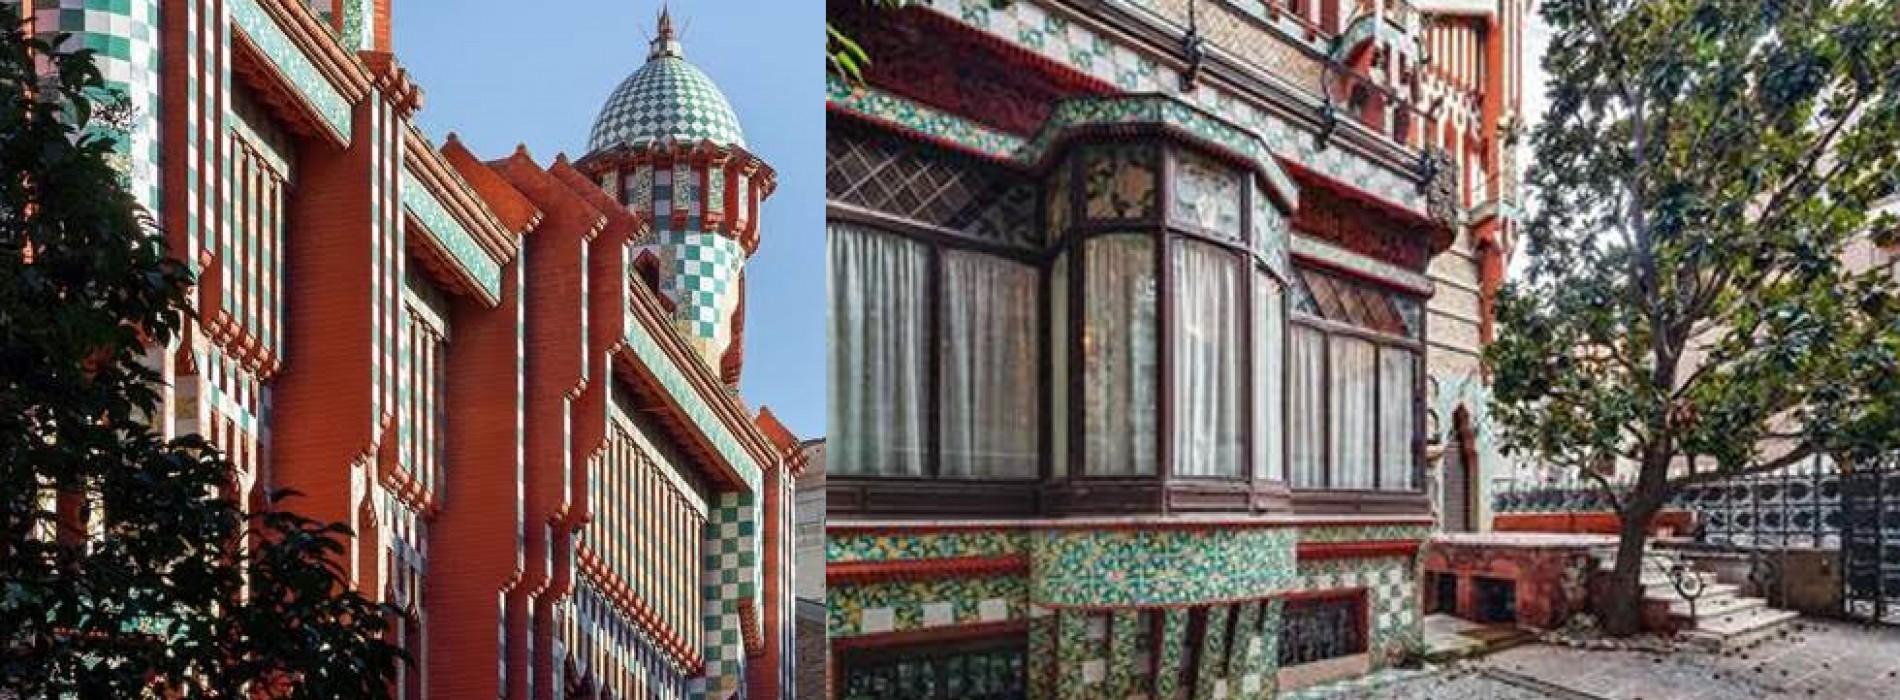 Casa Vicens, Gaudí’s First House in Barcelona will be opened in October 2017